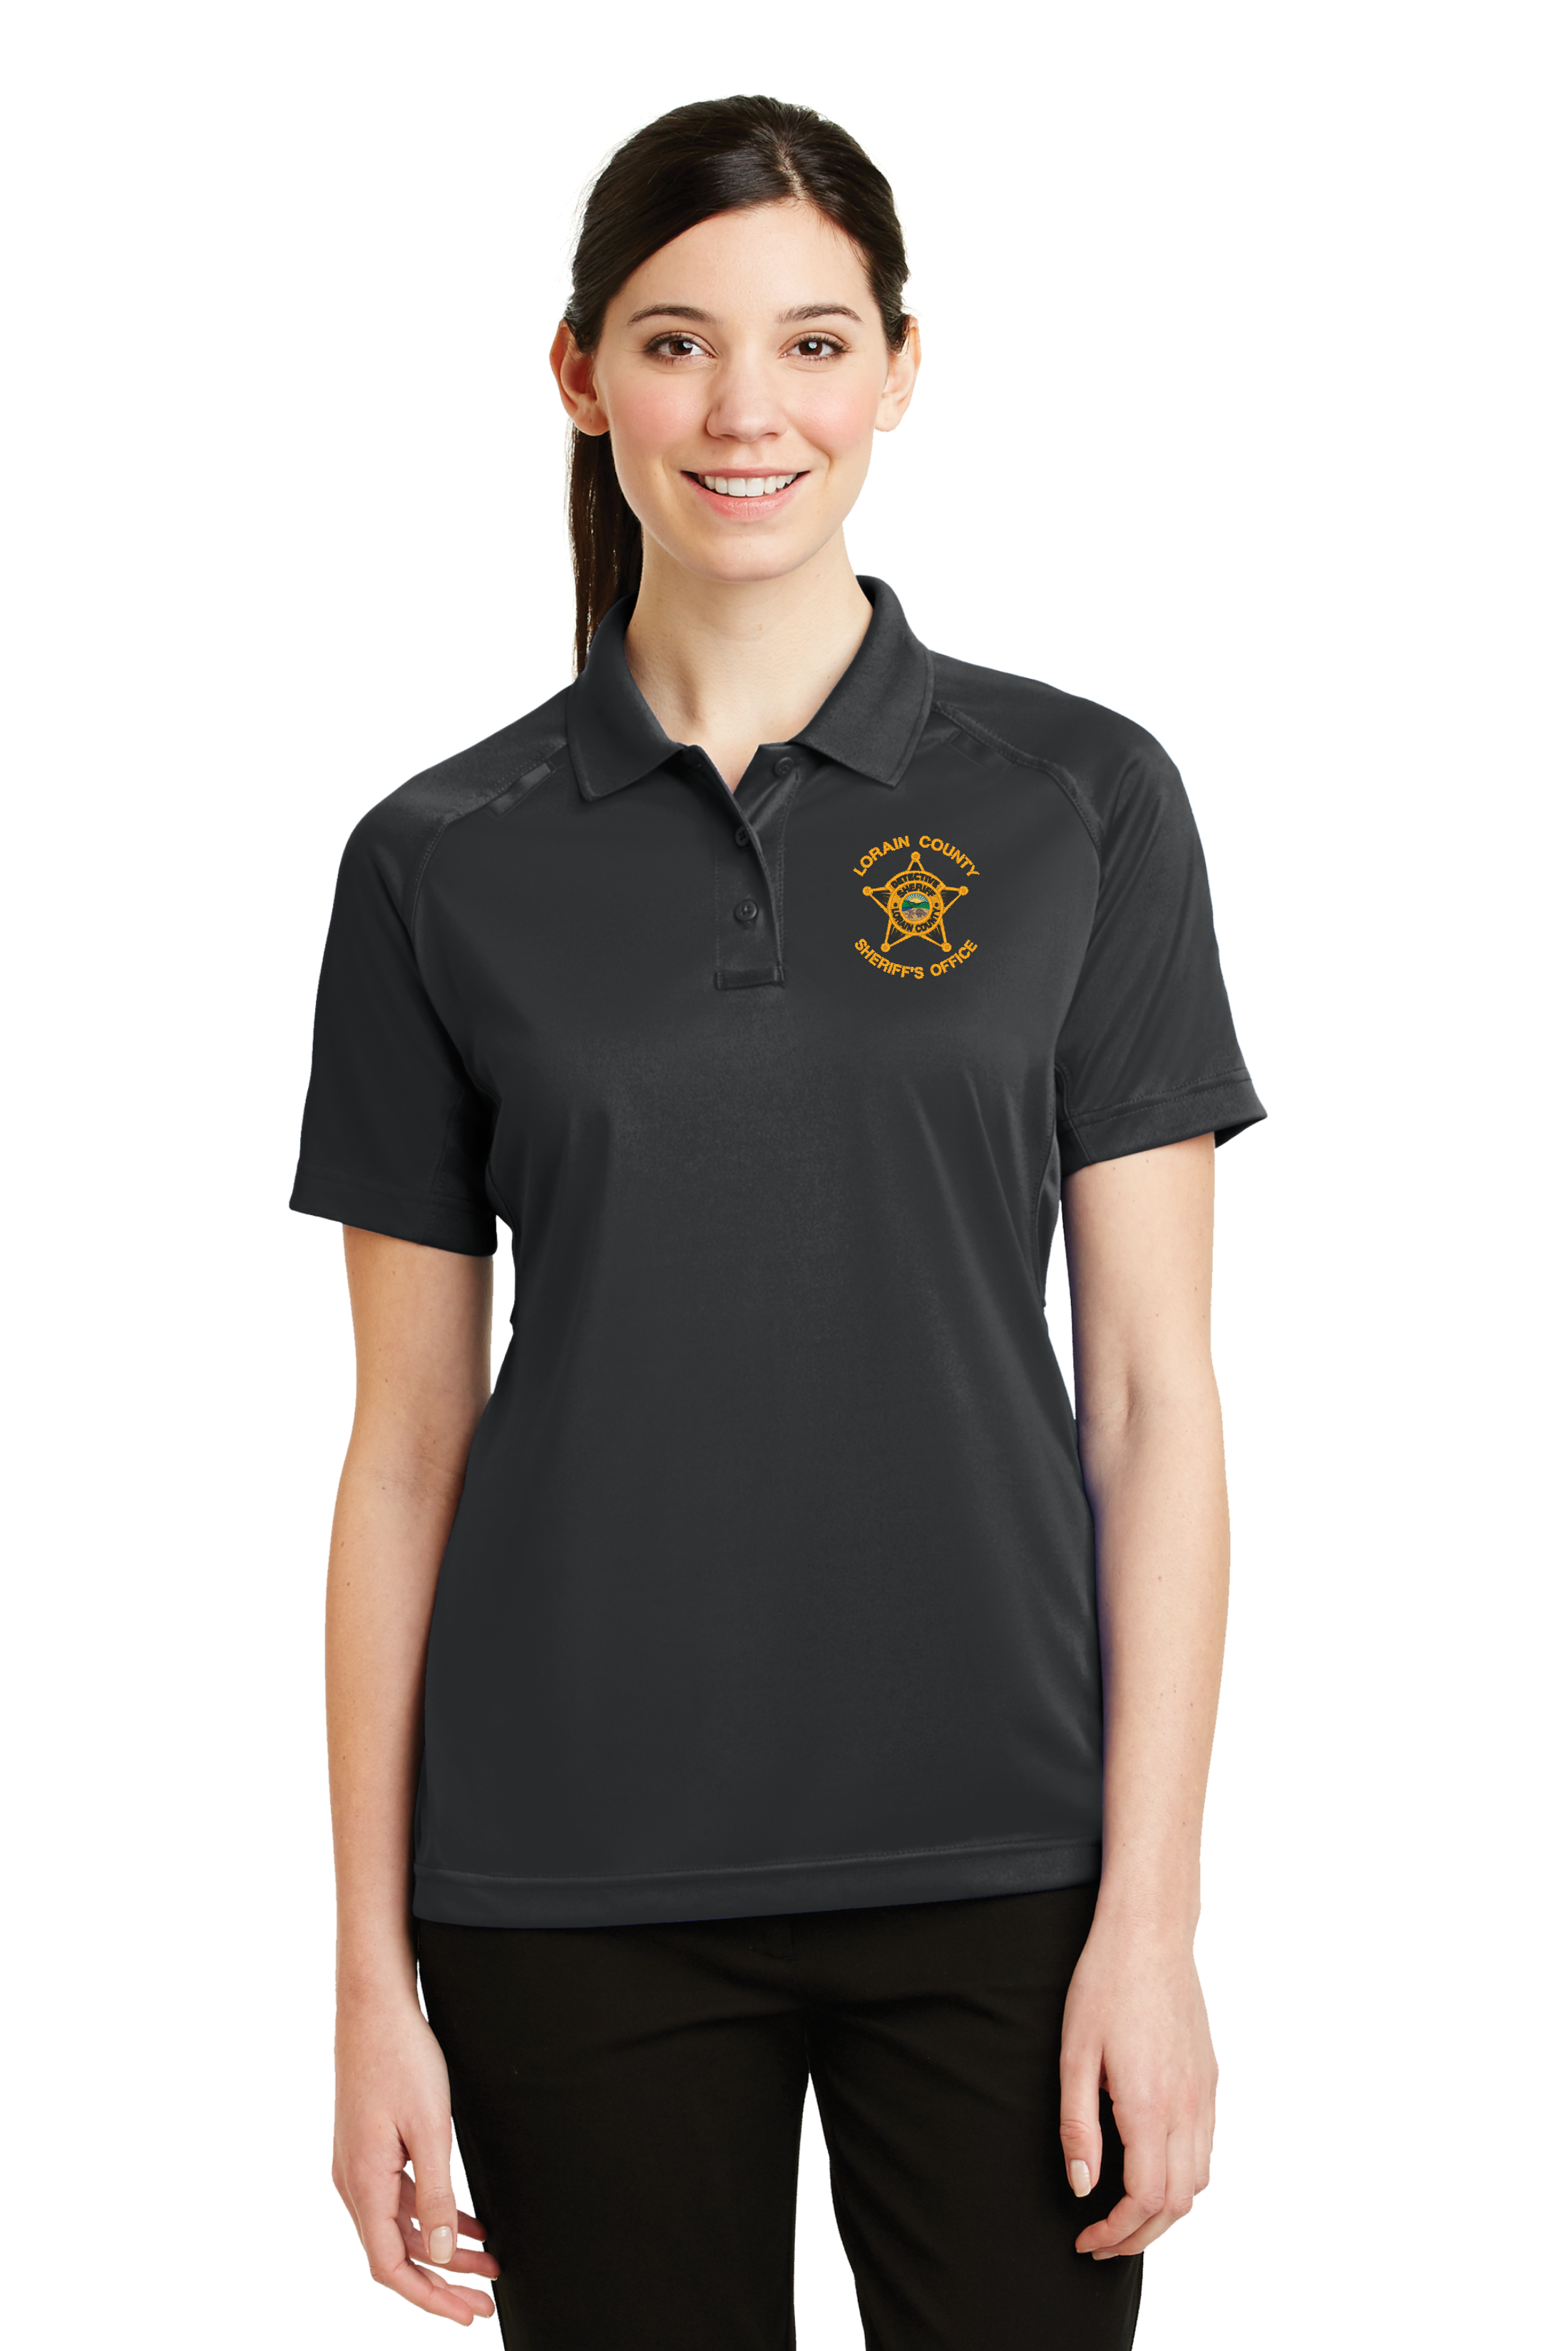 LCSO DETECTIVE CS411 LADIES CornerStone® - Select Snag-Proof Tactical Polo